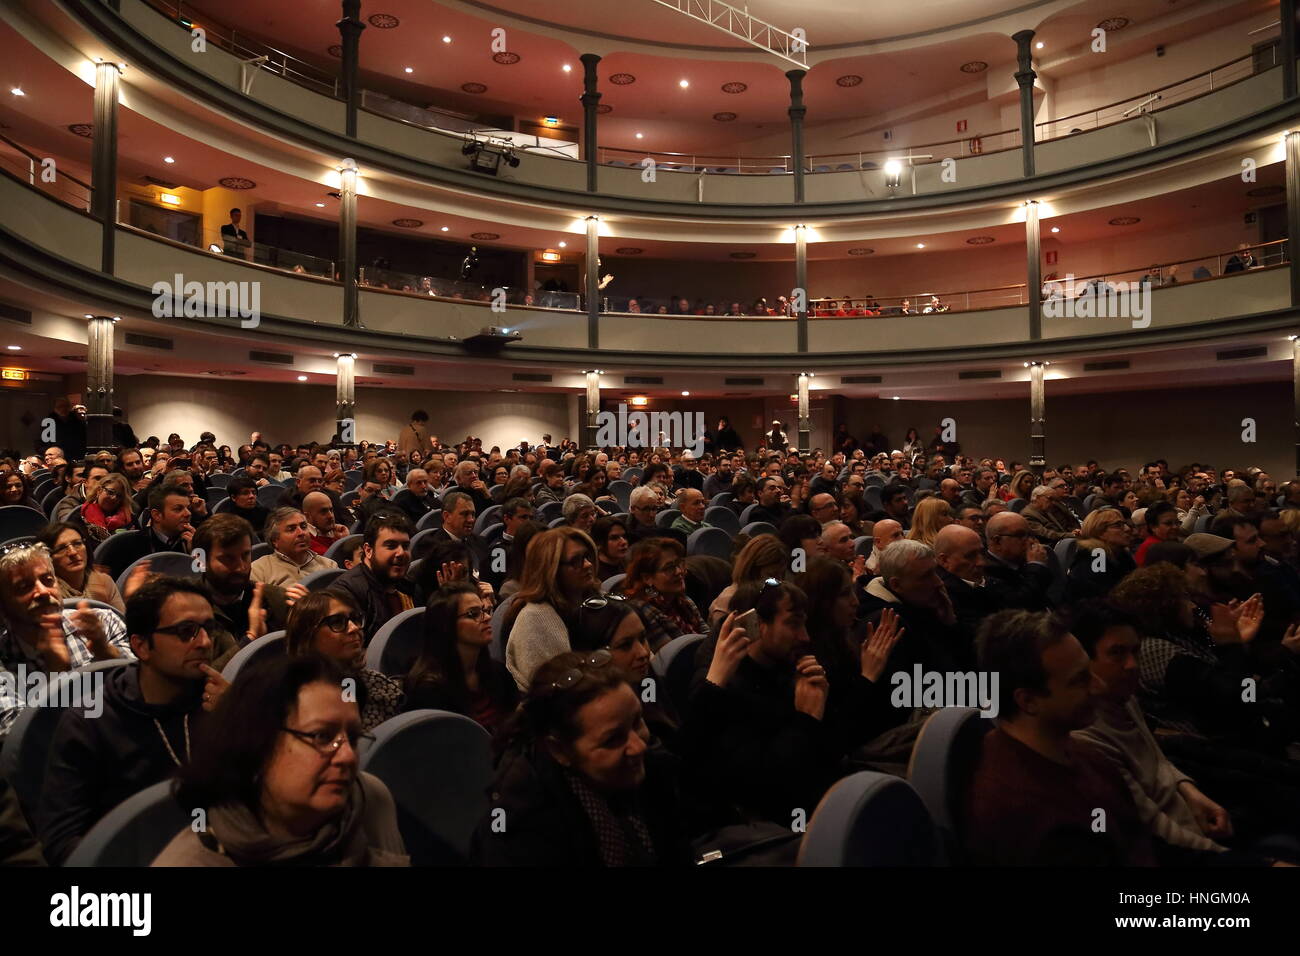 Teatro Ambra Jovinelli High Resolution Stock Photography and Images - Alamy